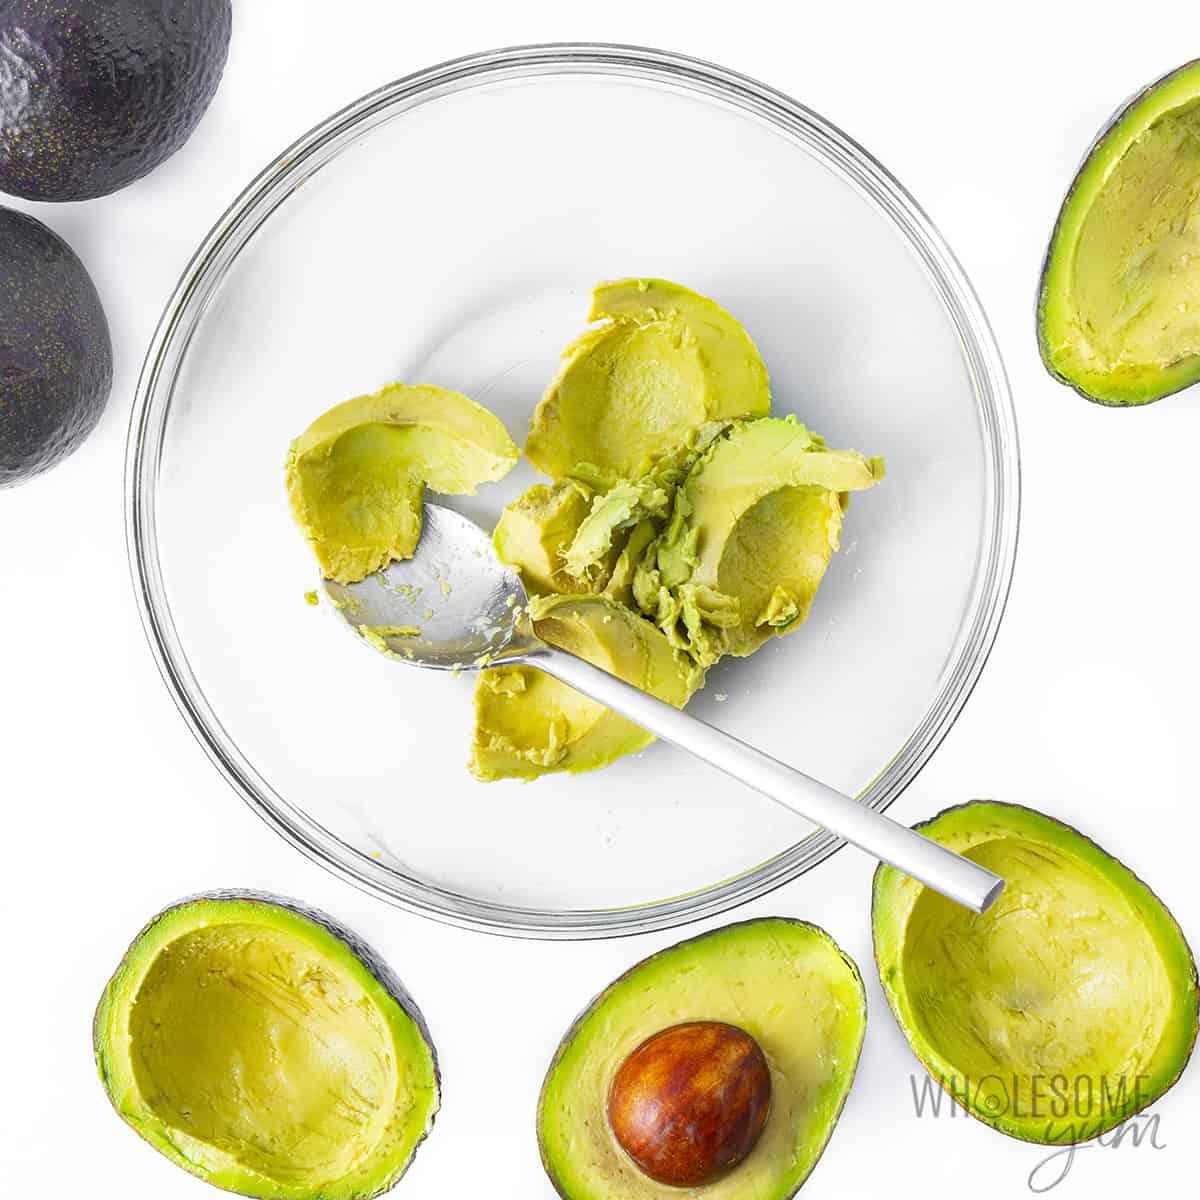 Avocados partially scooped out with flesh transferred to a mixing bowl.